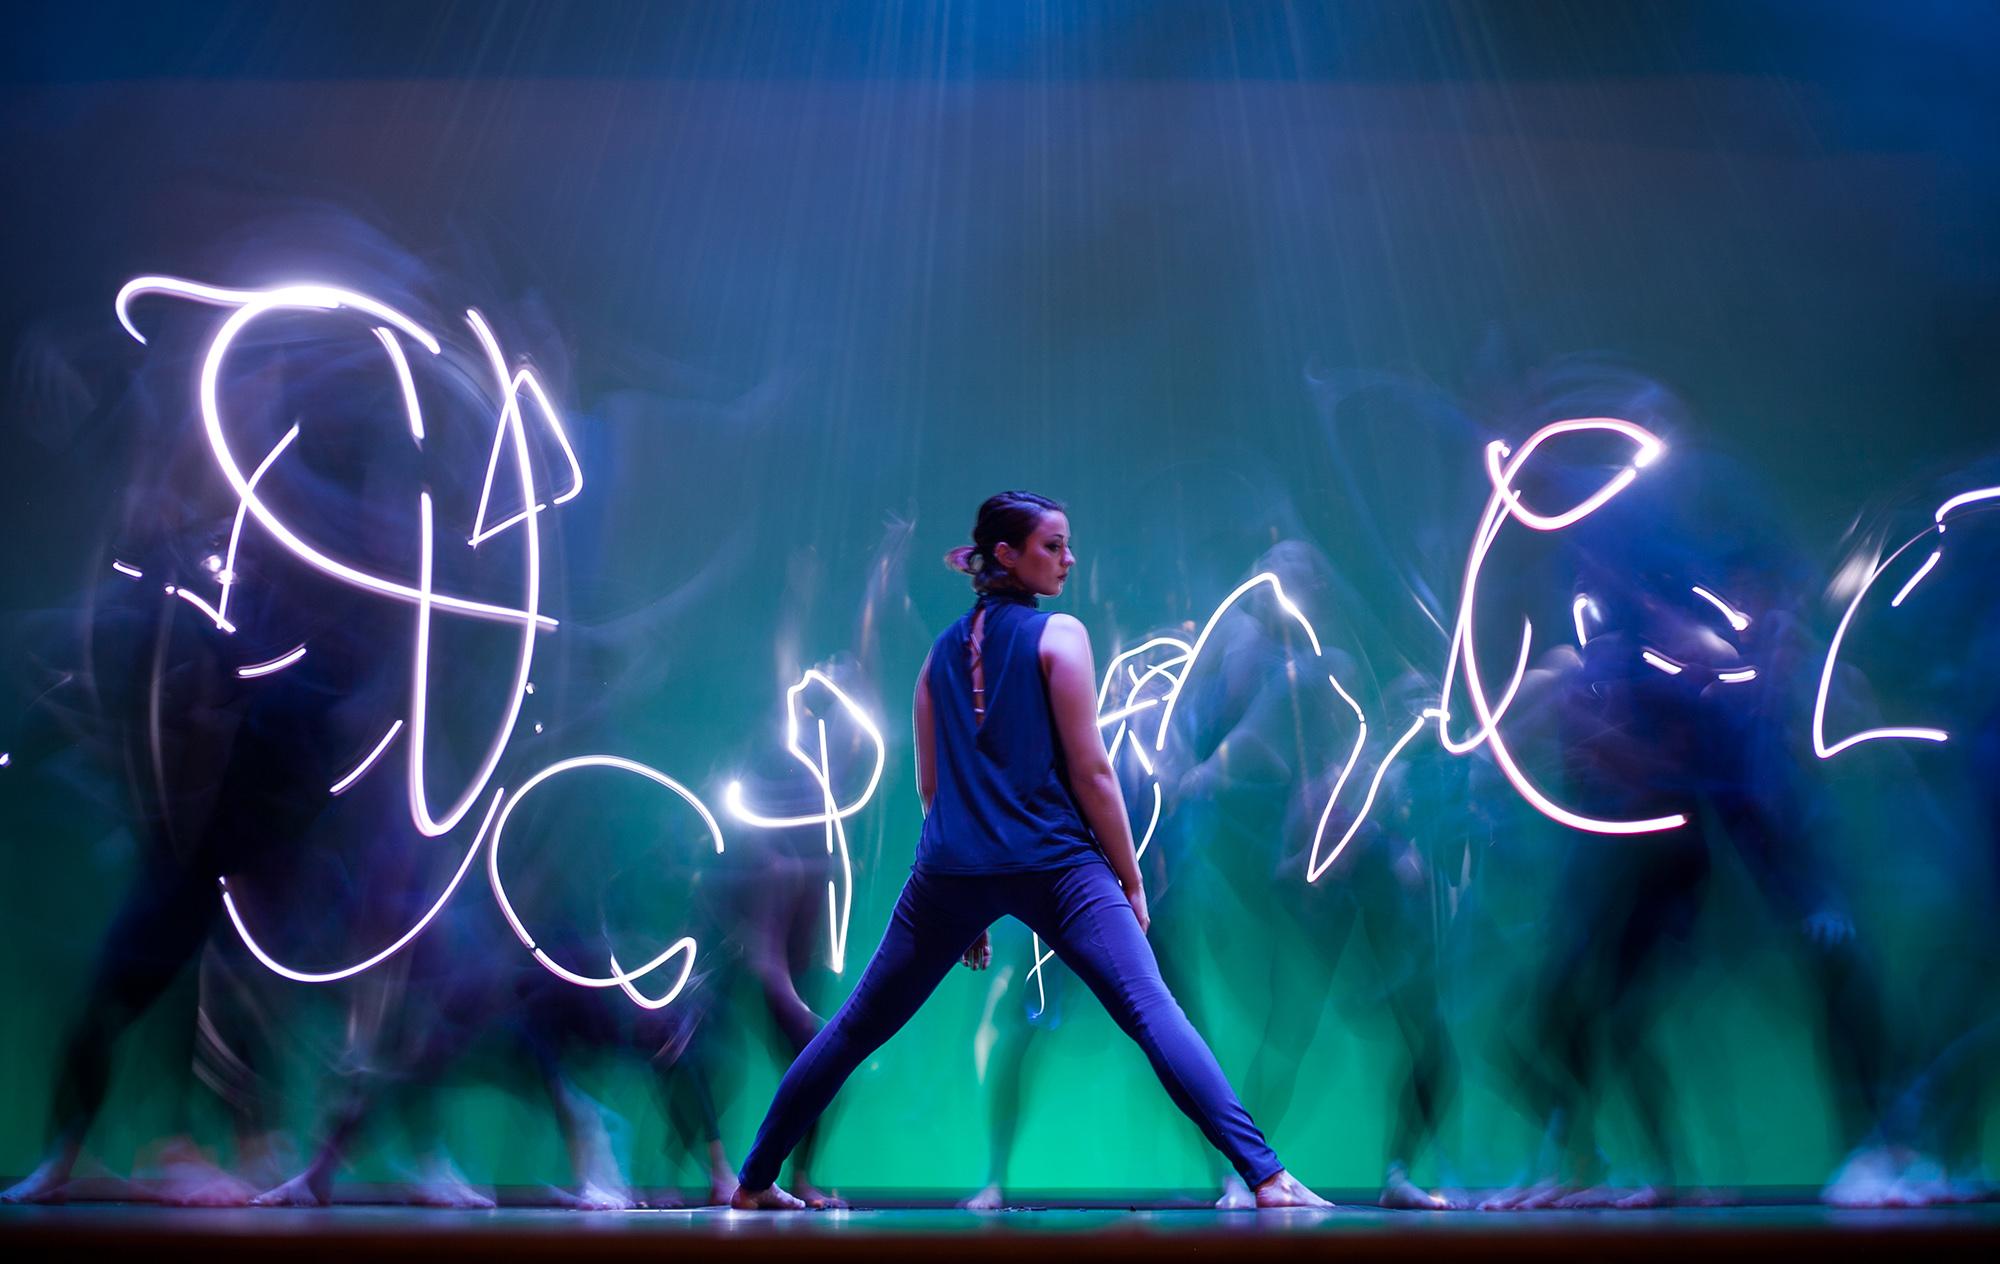 dancer surrounded by moving lights